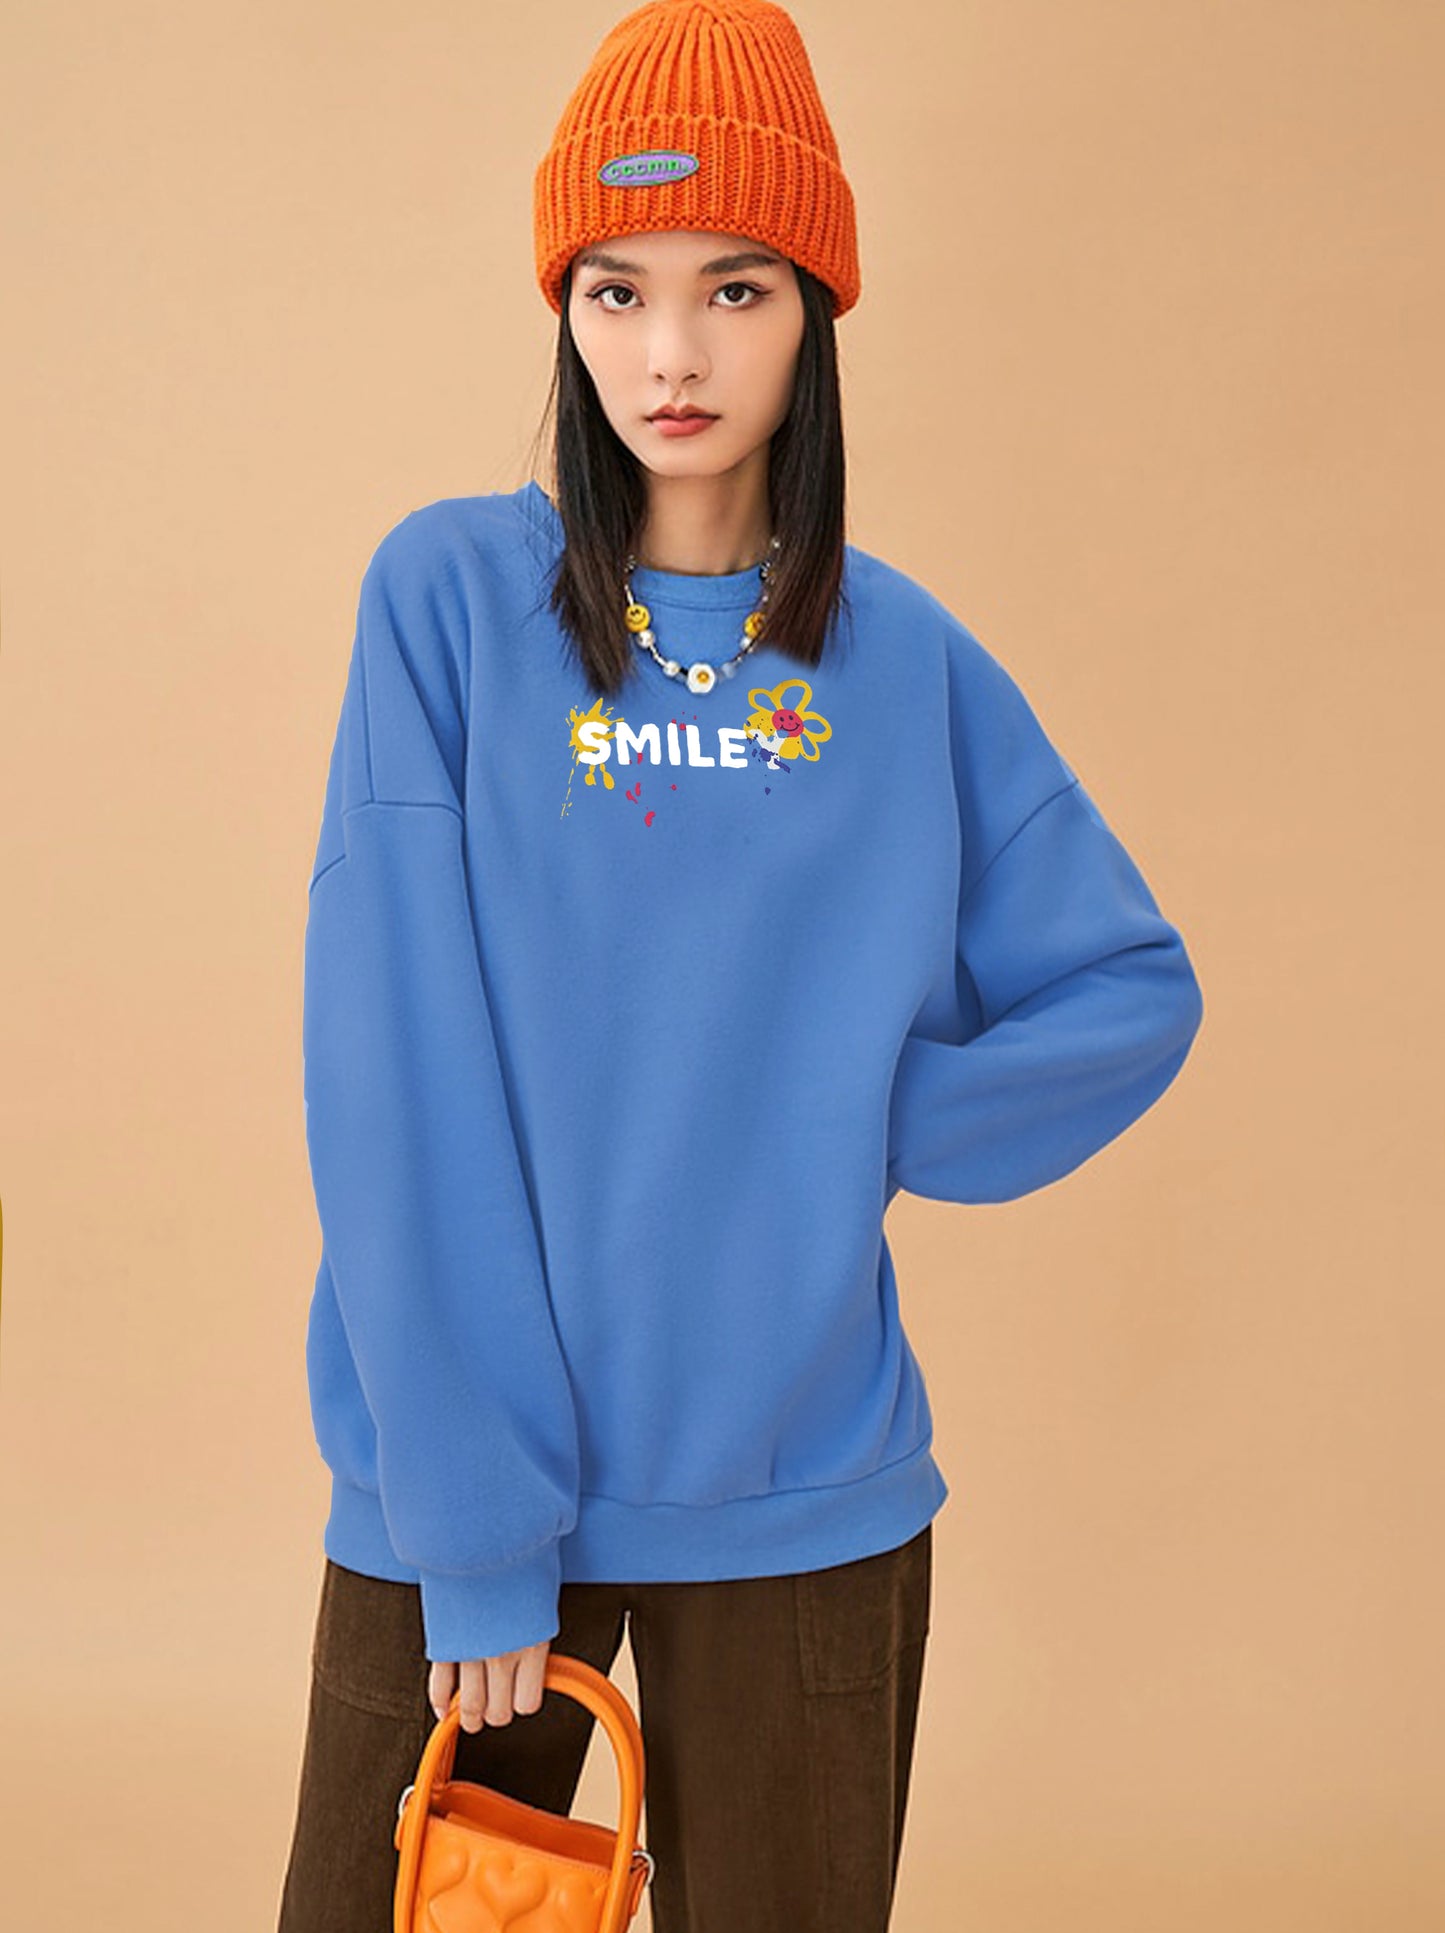 Amii Angel Classic Collection : Smile Sweater Hight Quality Print Logo (Organic Cotton)